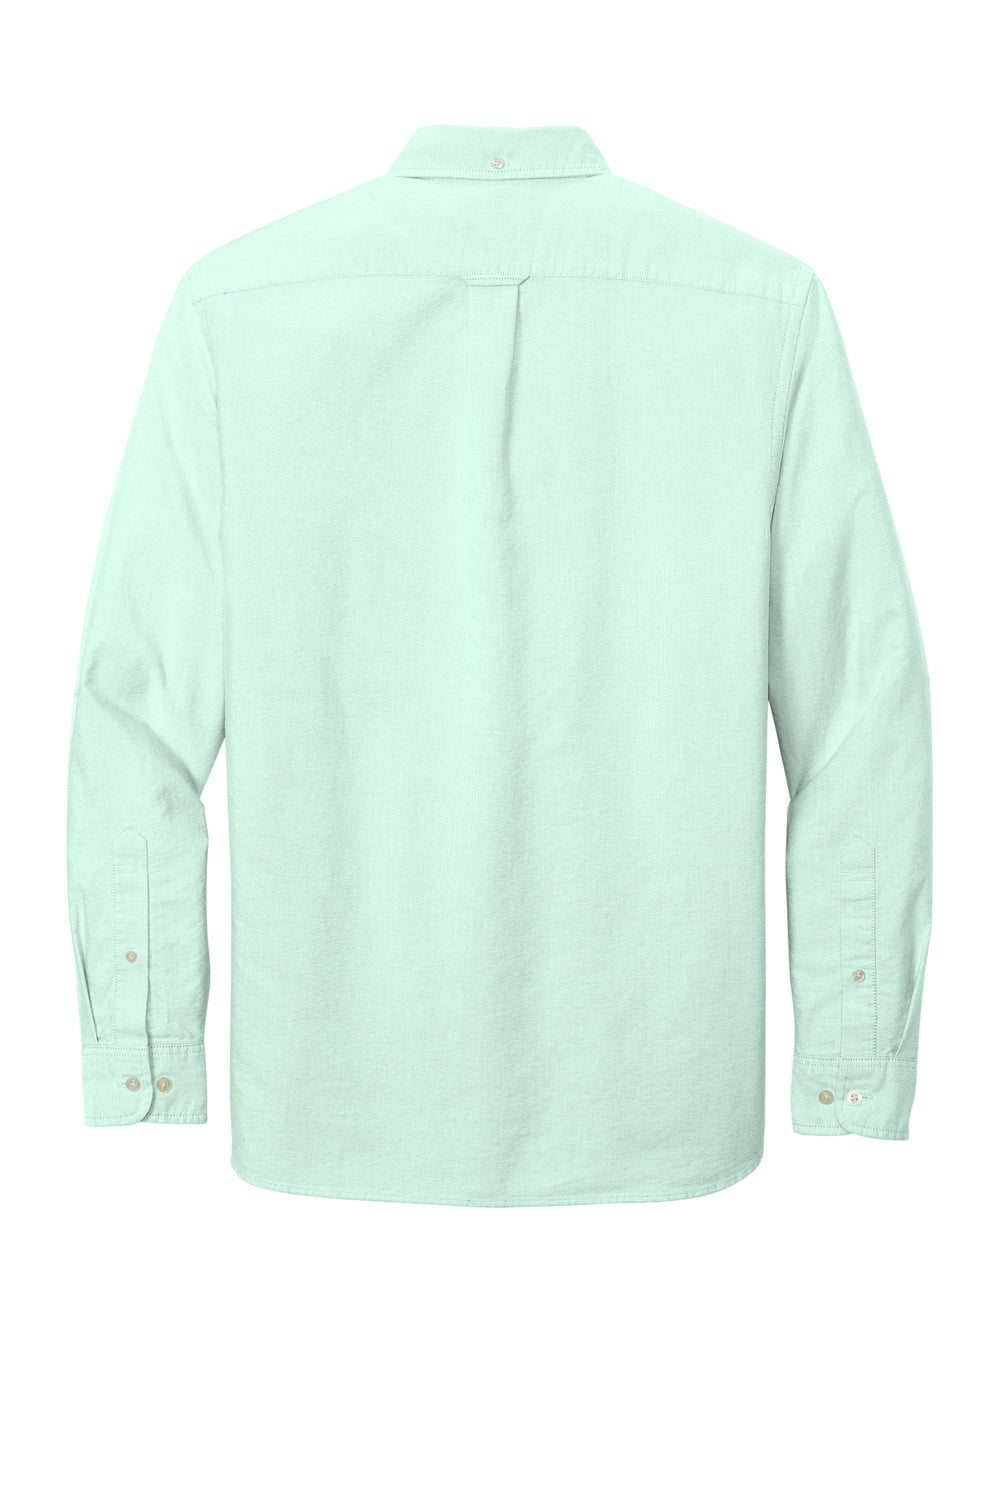 Brooks Brothers Mens Casual Oxford Long Sleeve Button Down Shirt w/ Pocket Soft Mint Green Flat Back